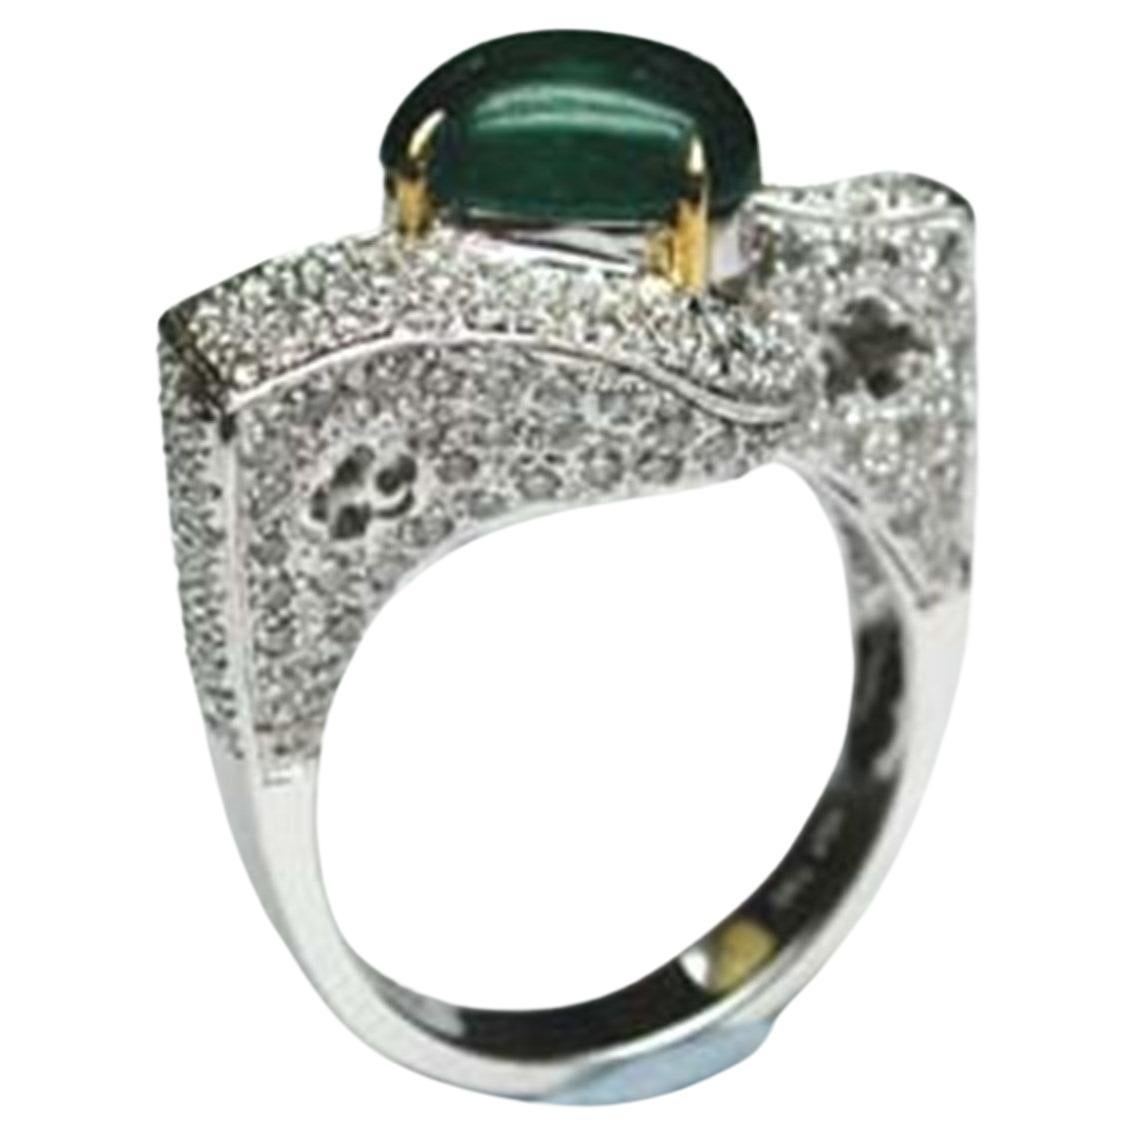 Emerald Cabuchon Cts 2.11 and Diamond Engagement Ring